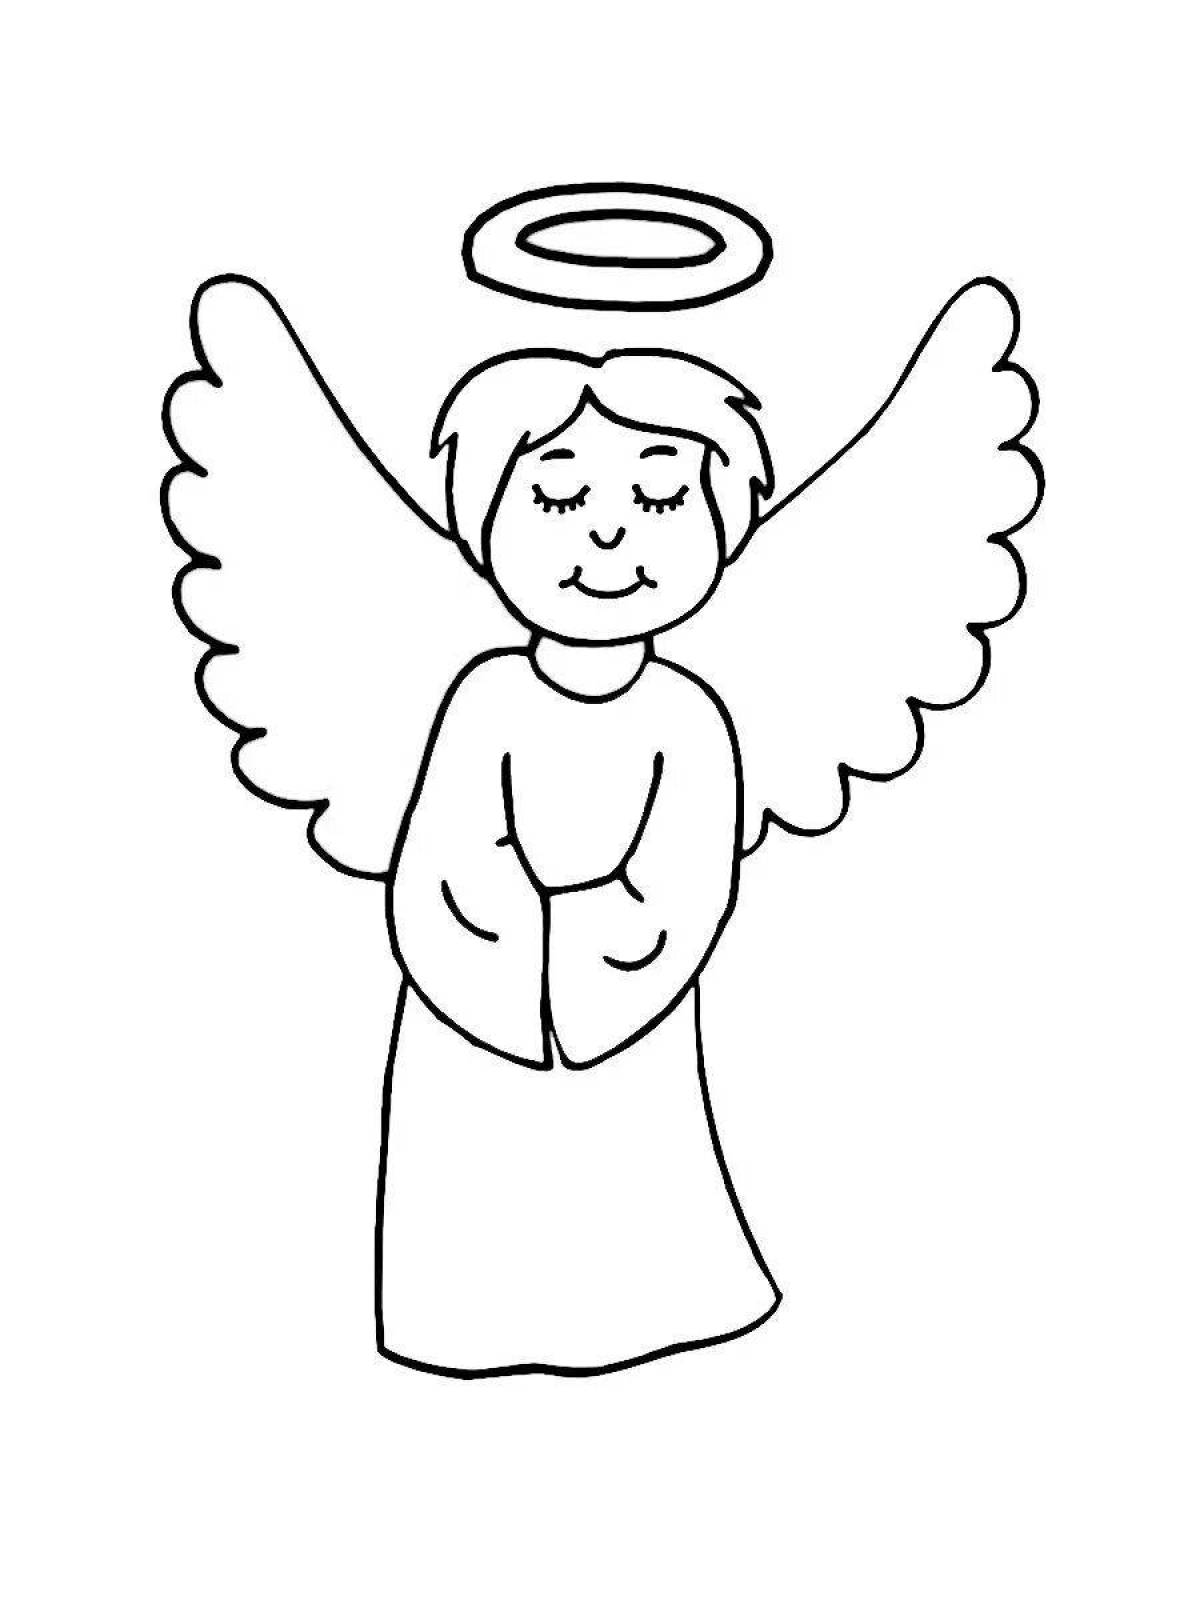 Exalted coloring pages angels with beautiful wings